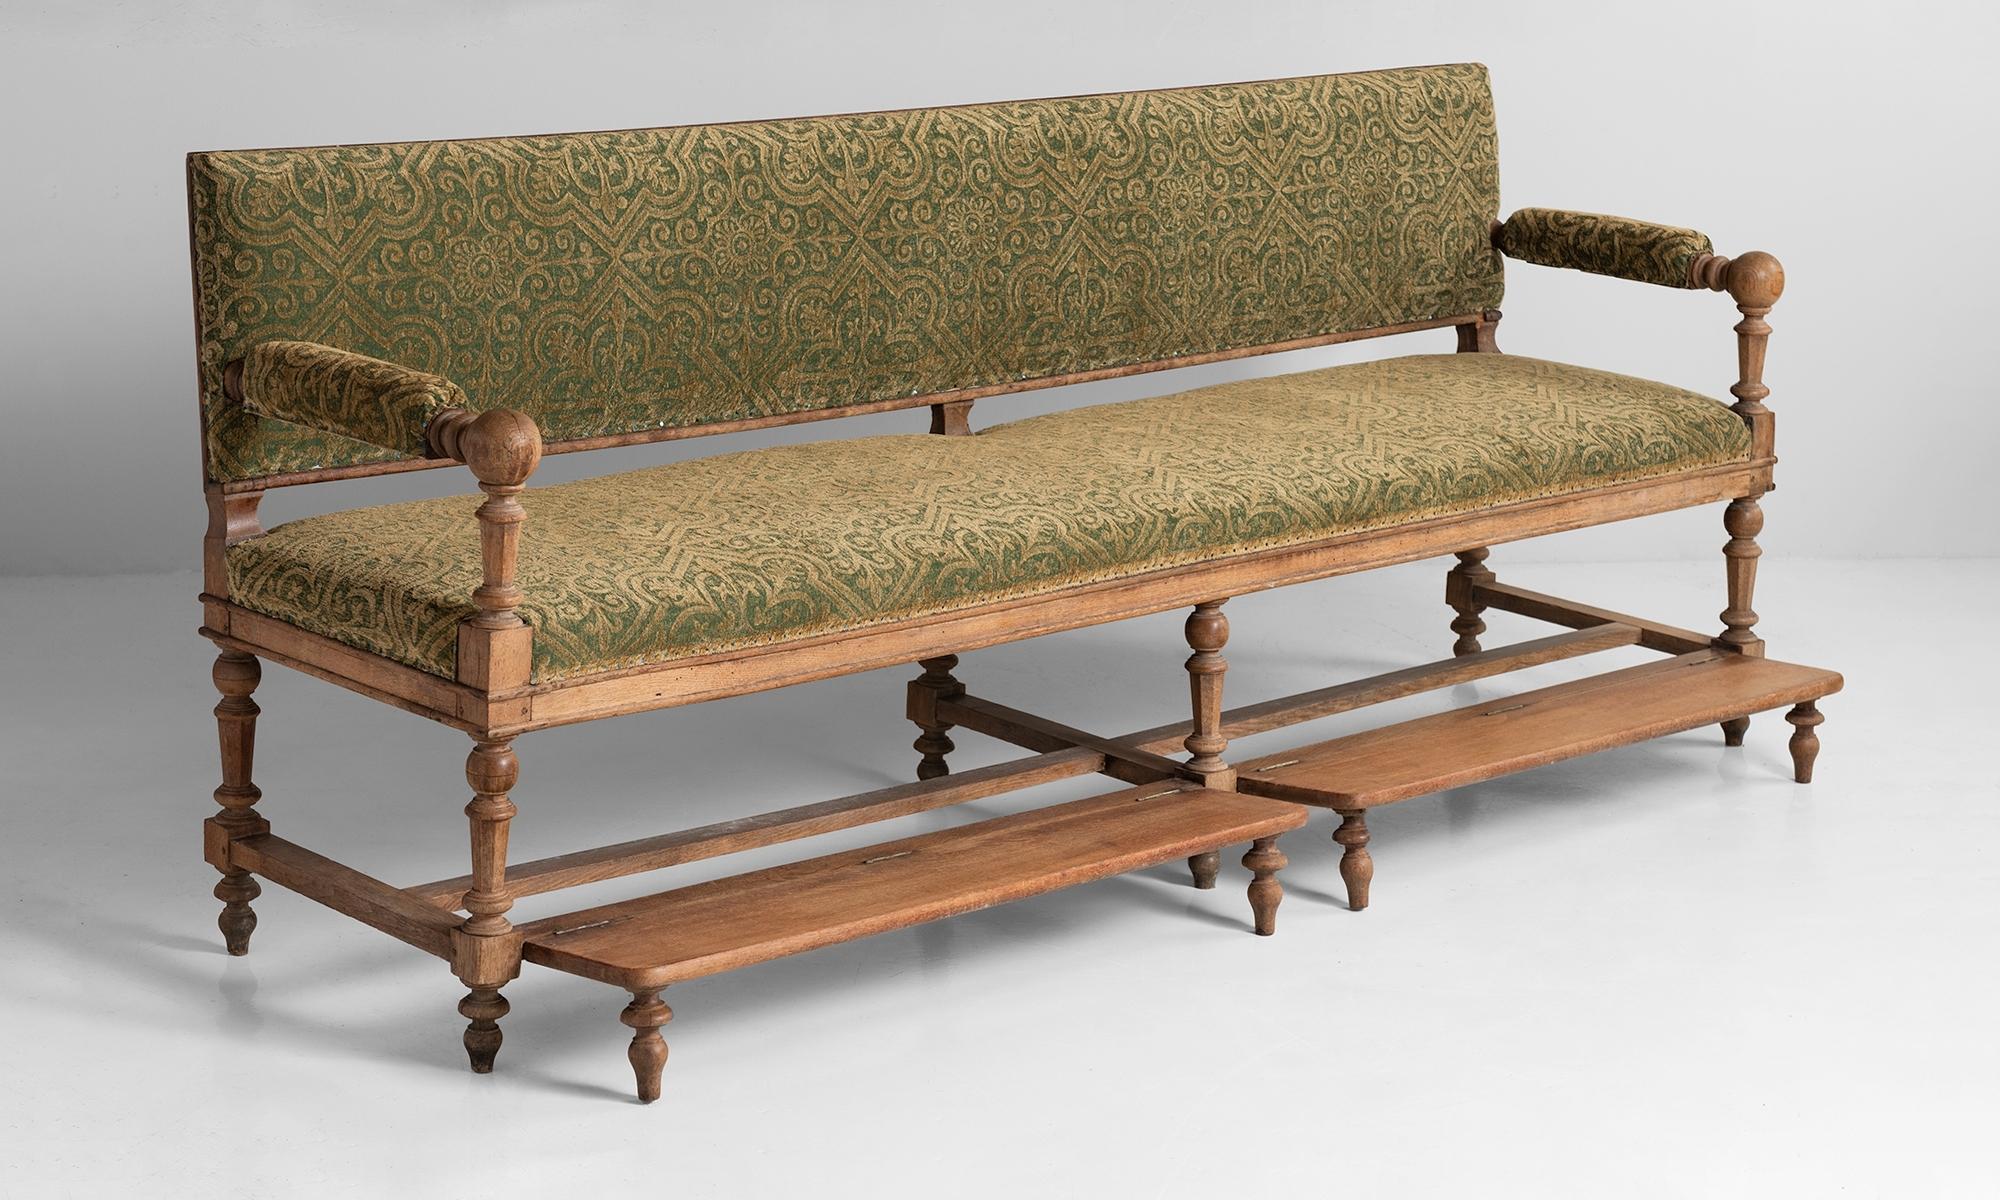 Primitive Hotel Bench, France, circa 1920.

Carved oak frame, reupholstered in antique fabric, with exposed back.